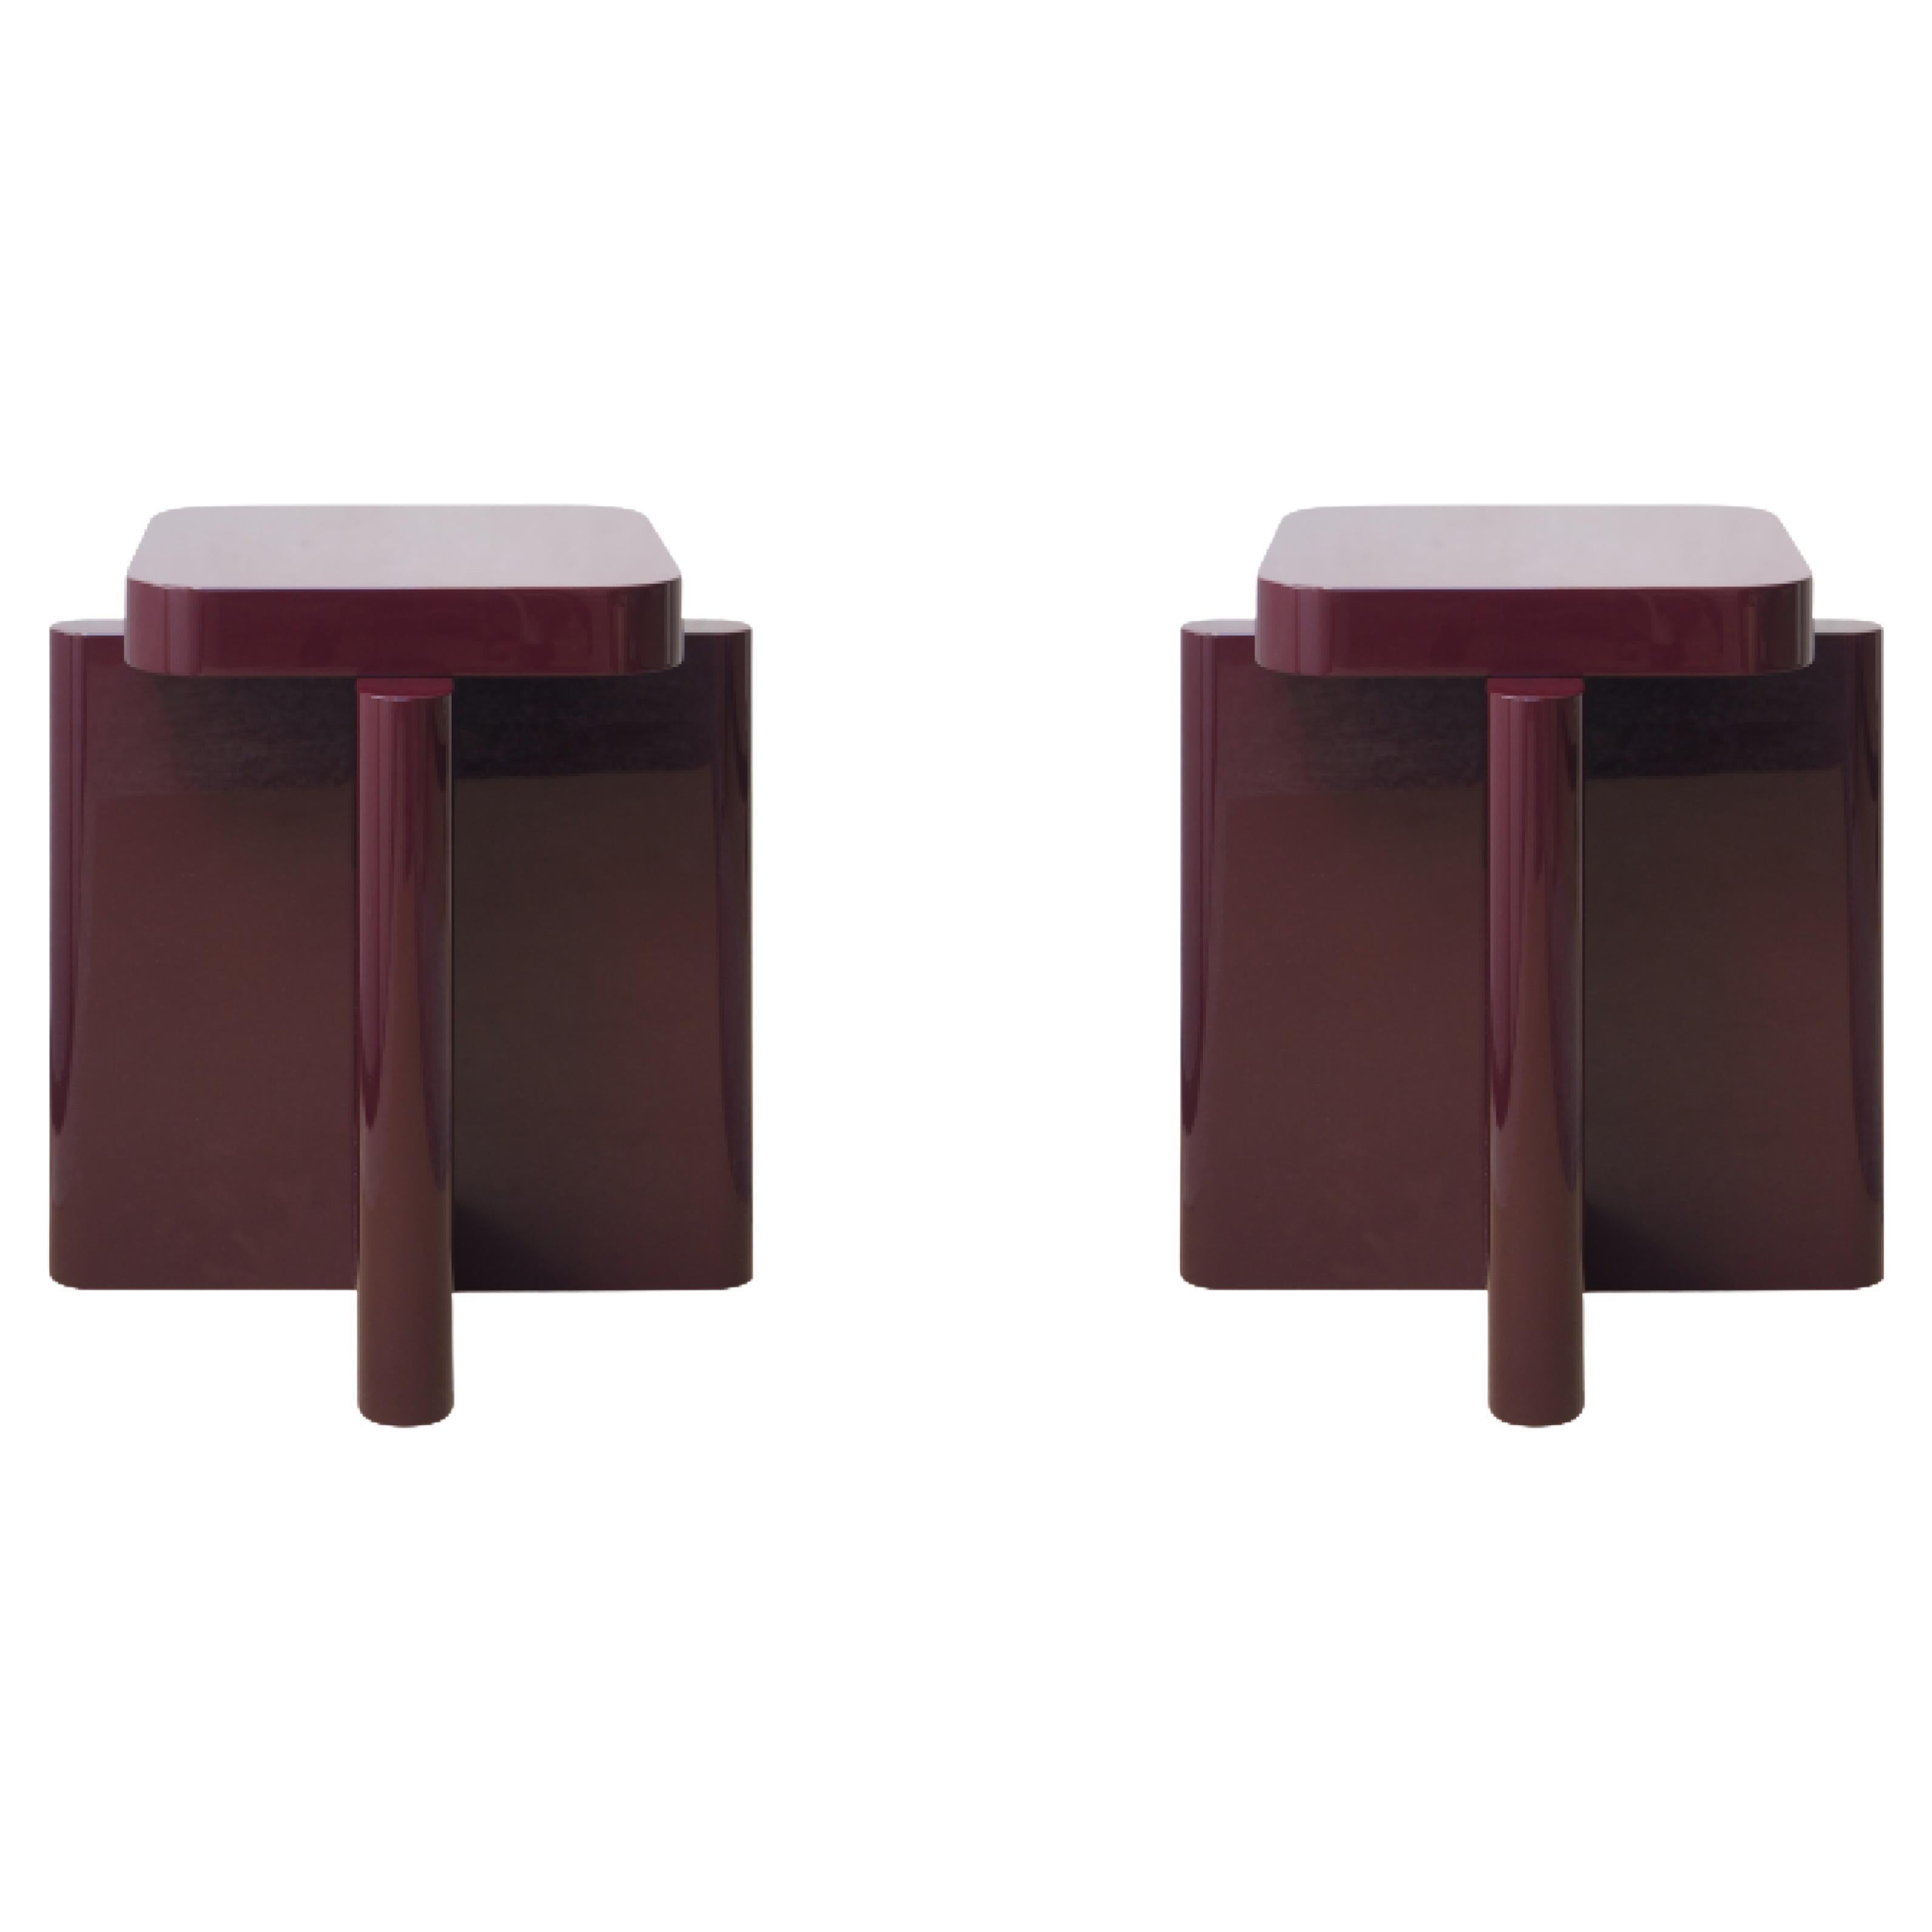 Pair of Spina stool by Cara Davide
Dimensions: D 40 x W 40 x H 45 cm 
Materials: Nut Wood, Lacquered MDF. 
Also available in colors: Bordeaux, Caramel, Dusty Red, Off-White, and Natural Wood.


Spina is a collection of lacquered tables and